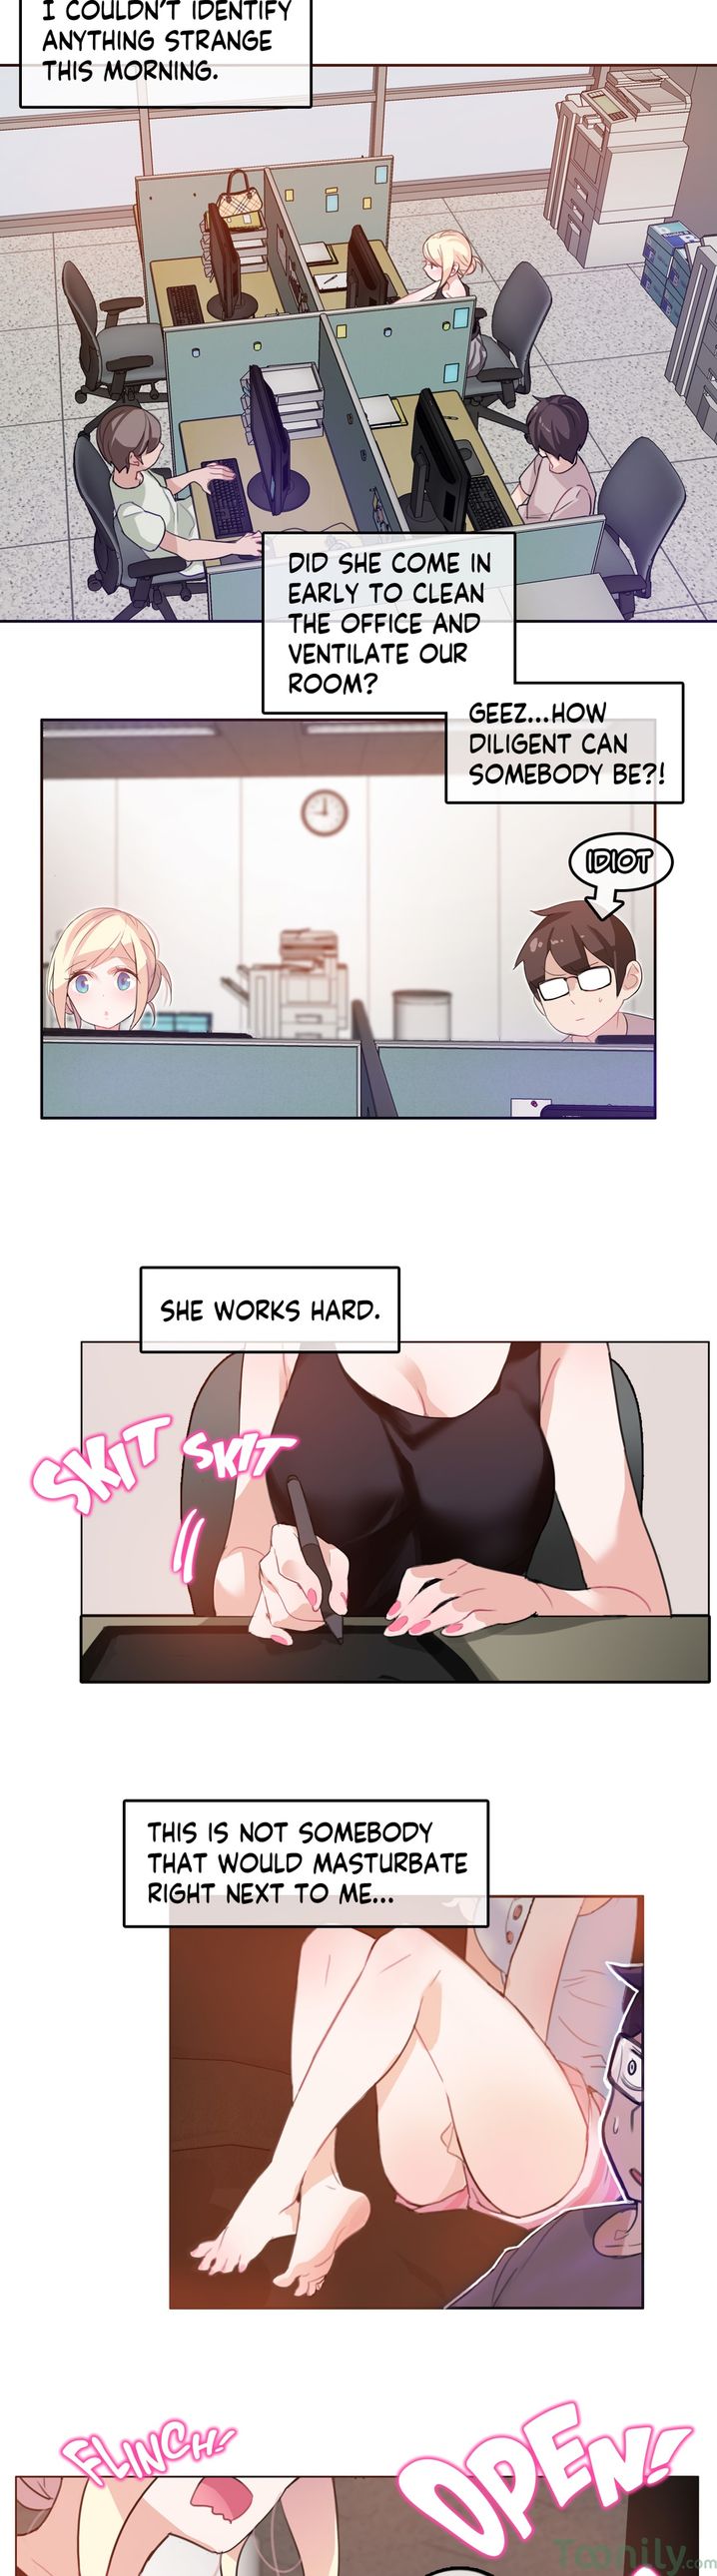 A Pervert’s Daily Life - Chapter 5 Page 8